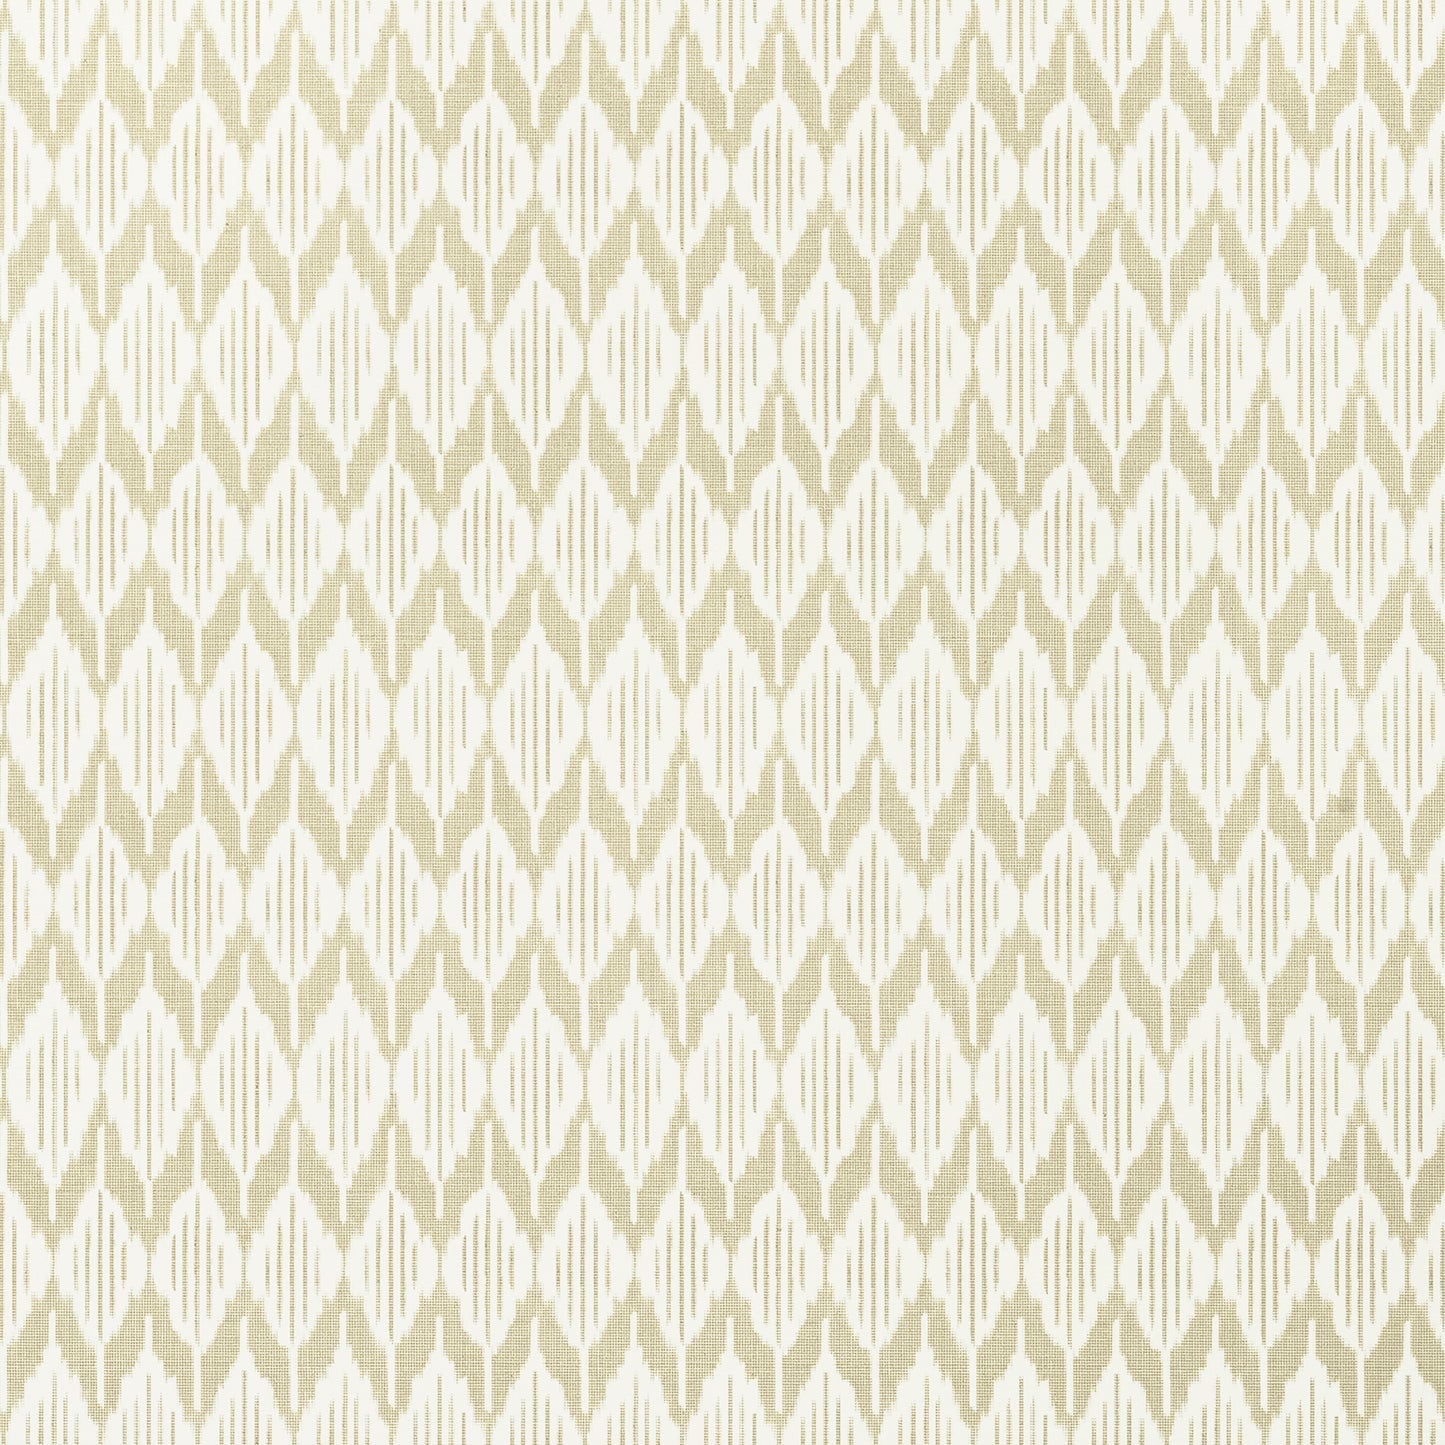 Purchase  Ann French Wallpaper Product AT79130 pattern name  Balin Ikat